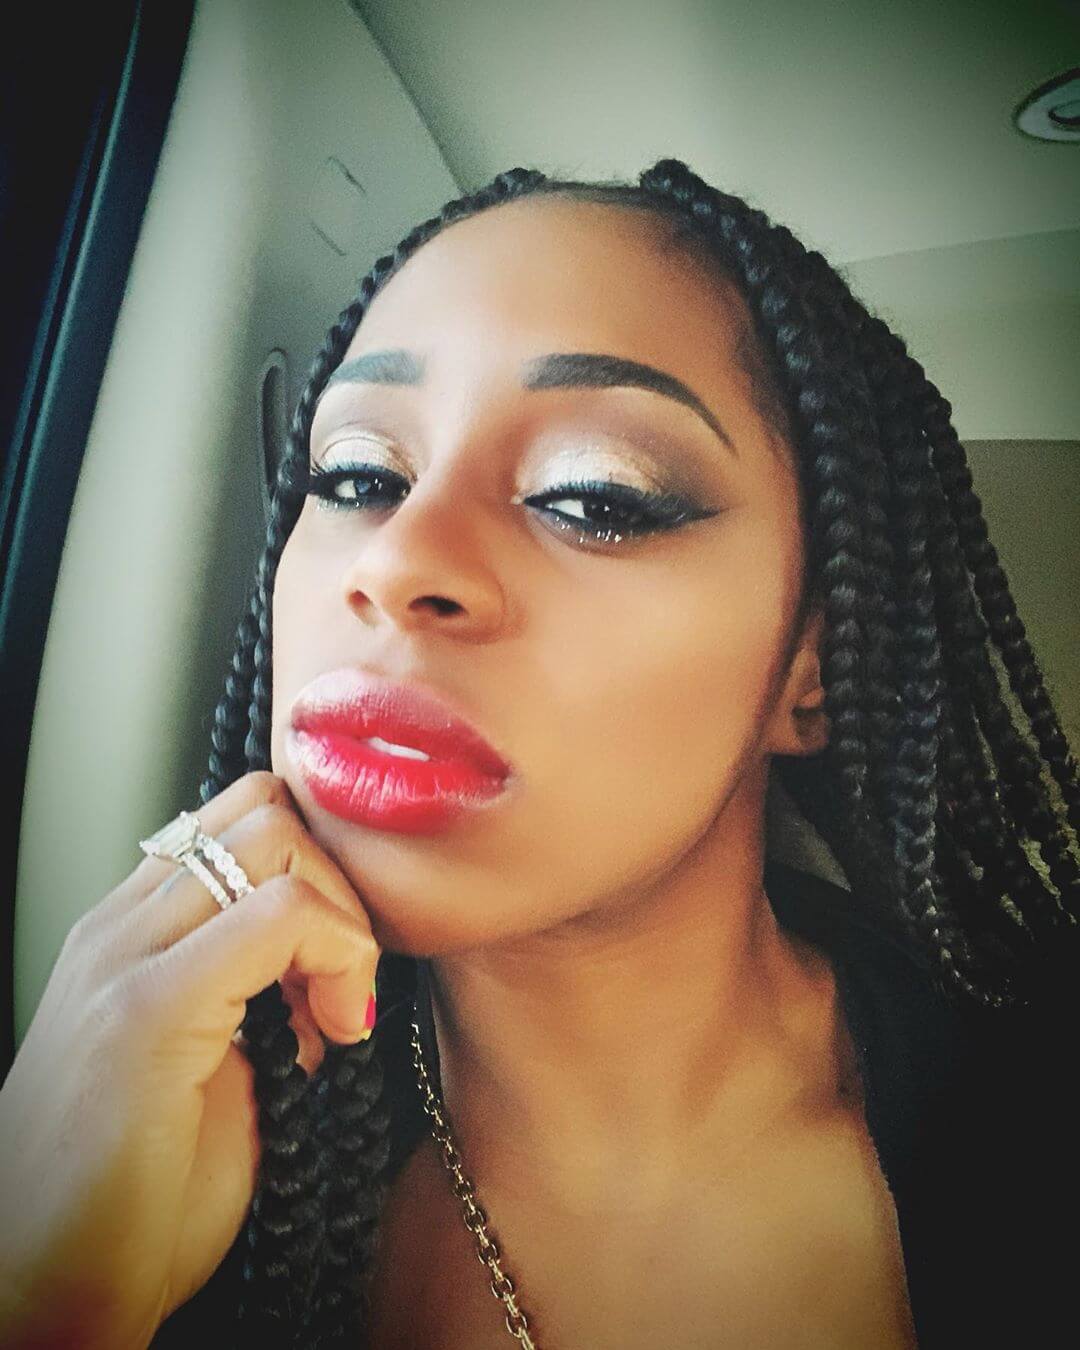 70+ Hot Pictures Of Naomi a.k.a Trinity Fatu from WWE Will Leave You Gasping For Her 4